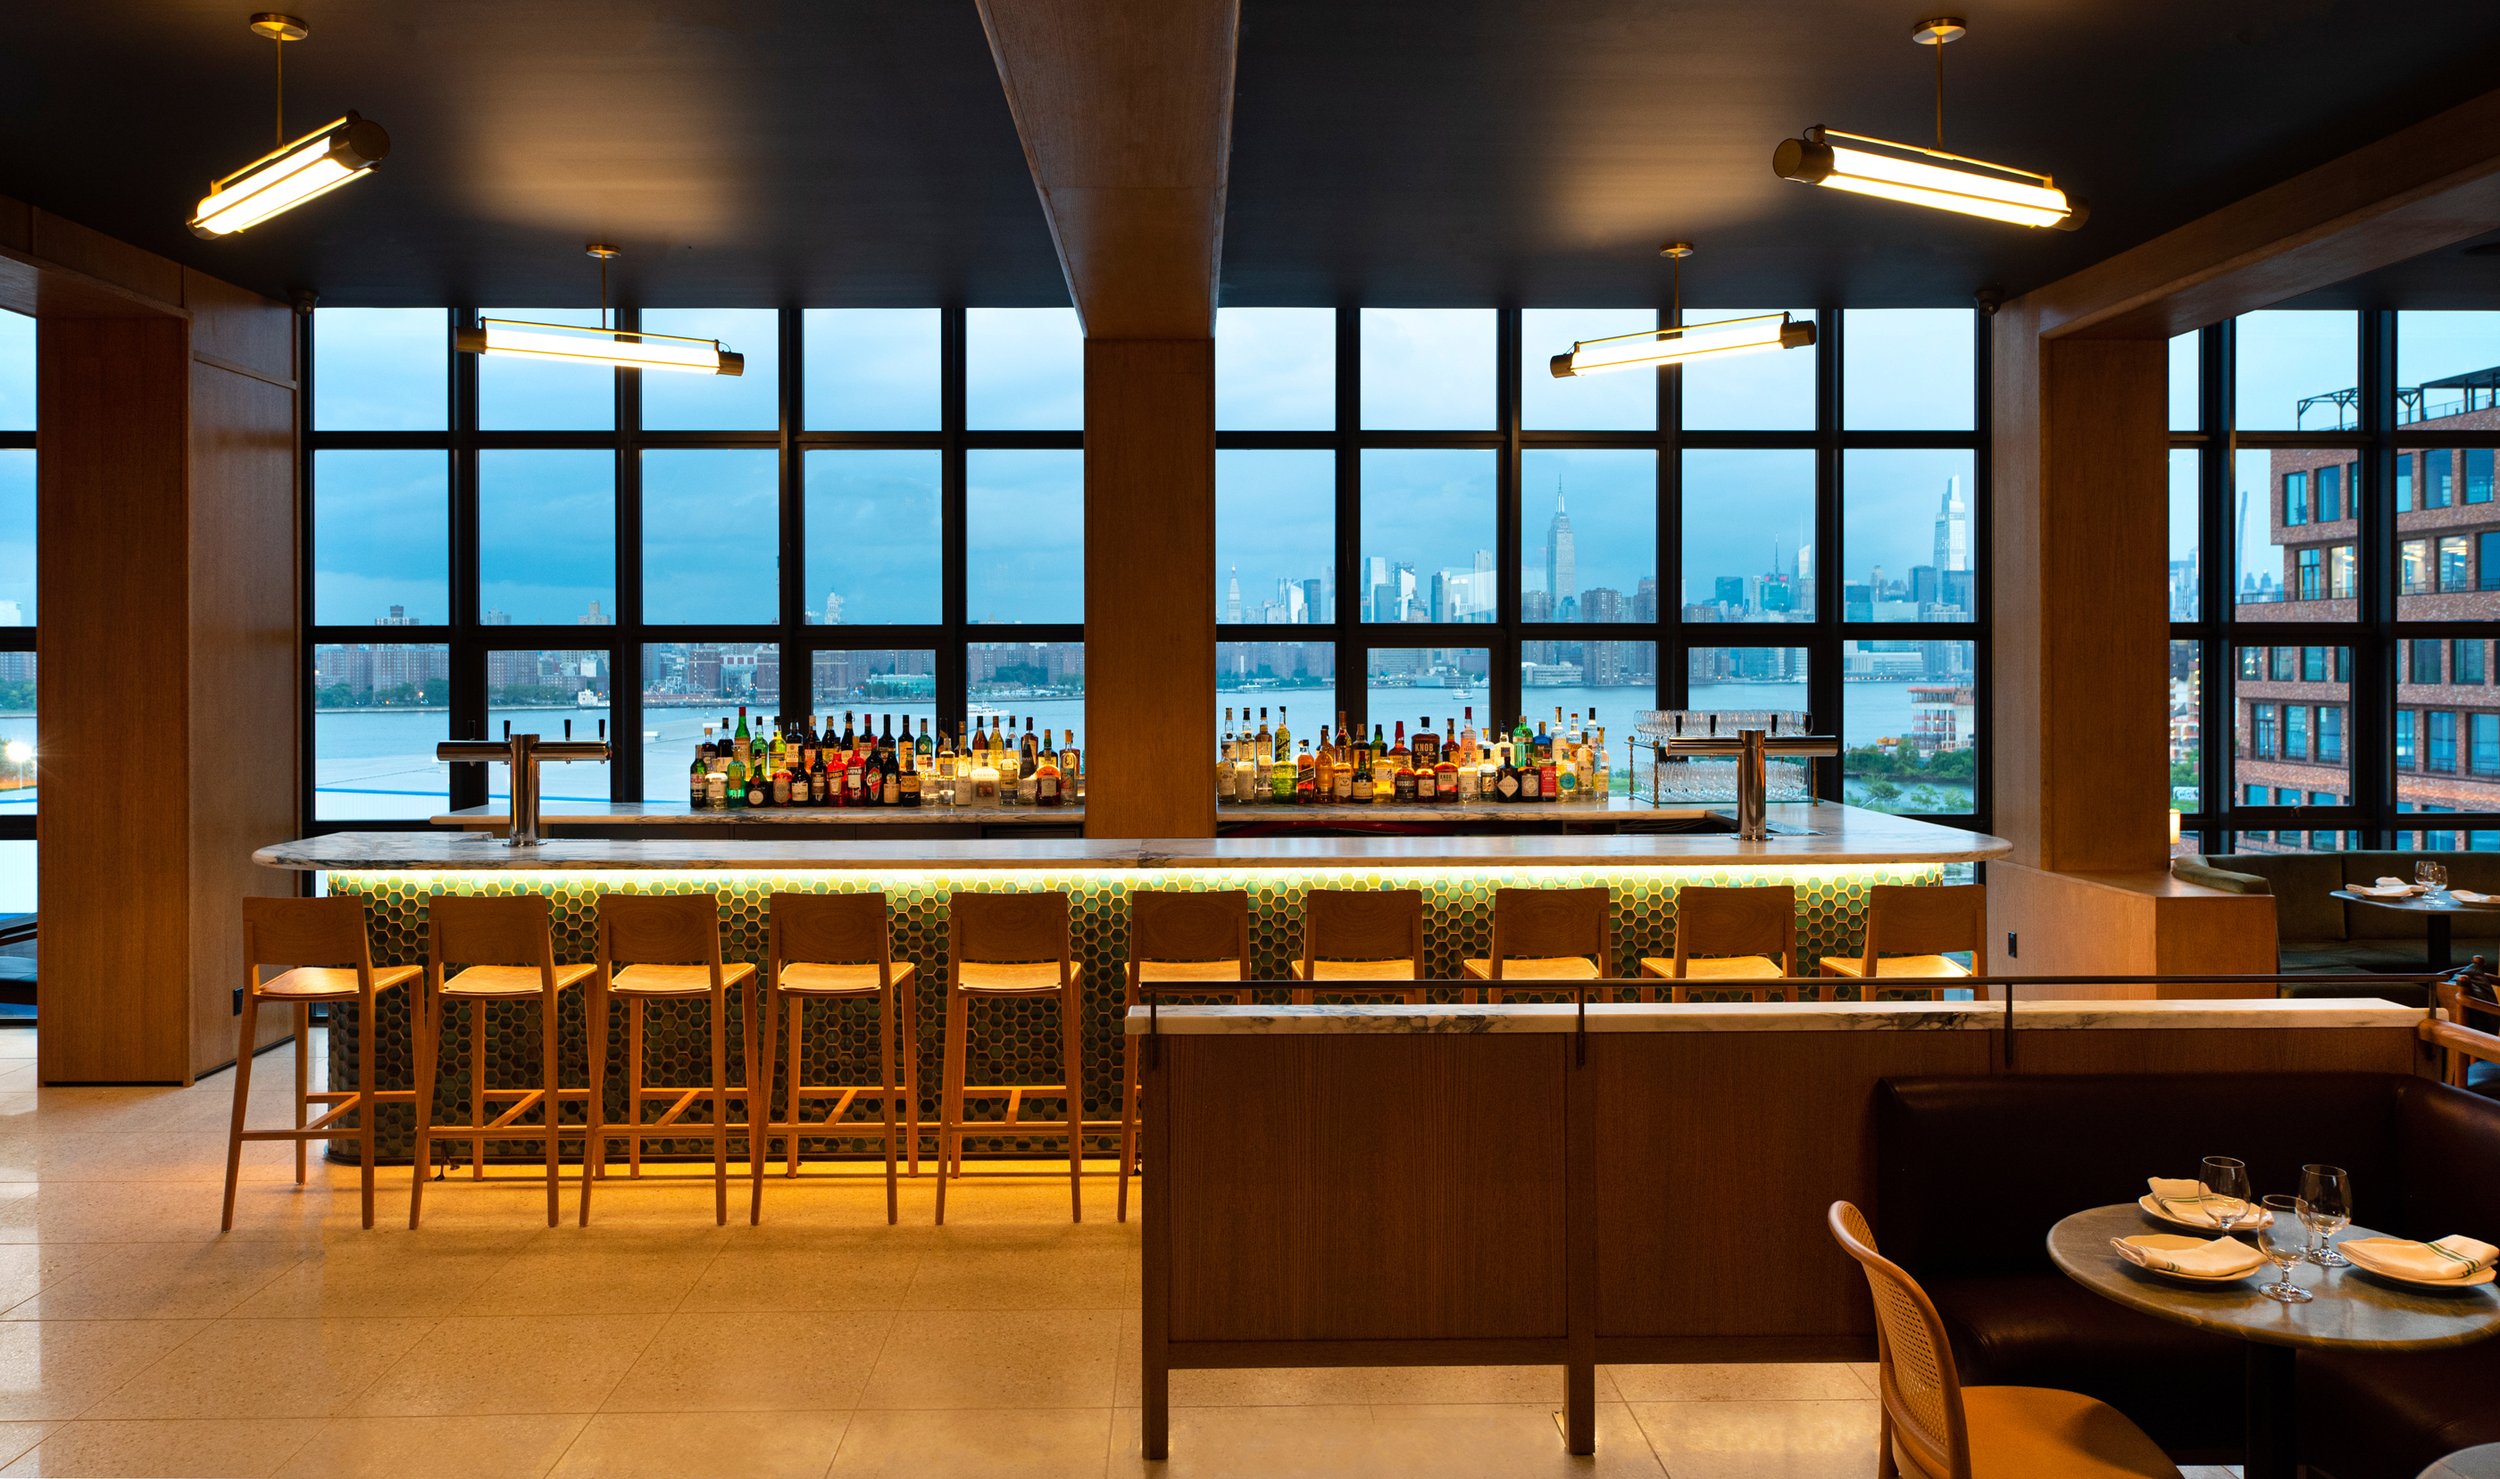 Bar Blondeau at the Wythe Hotel